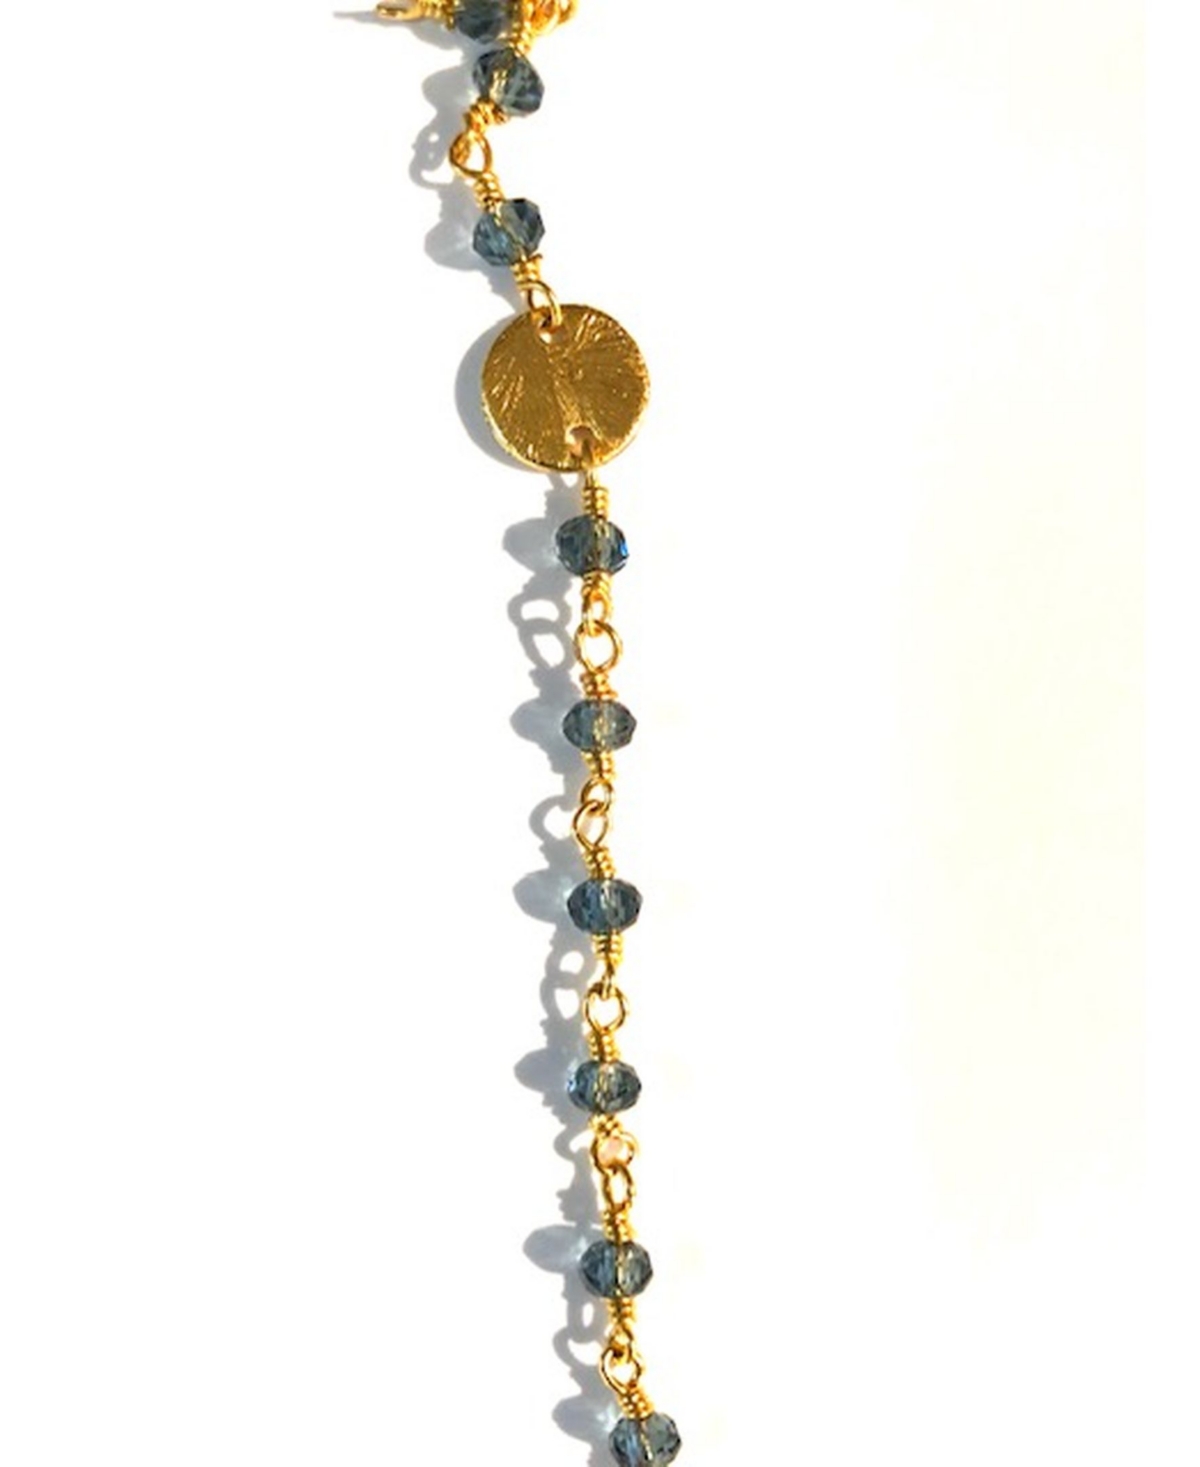 14k Gold Filled Semiprecious Stones and Coin Accents Handwrapped Necklace - Pyrite